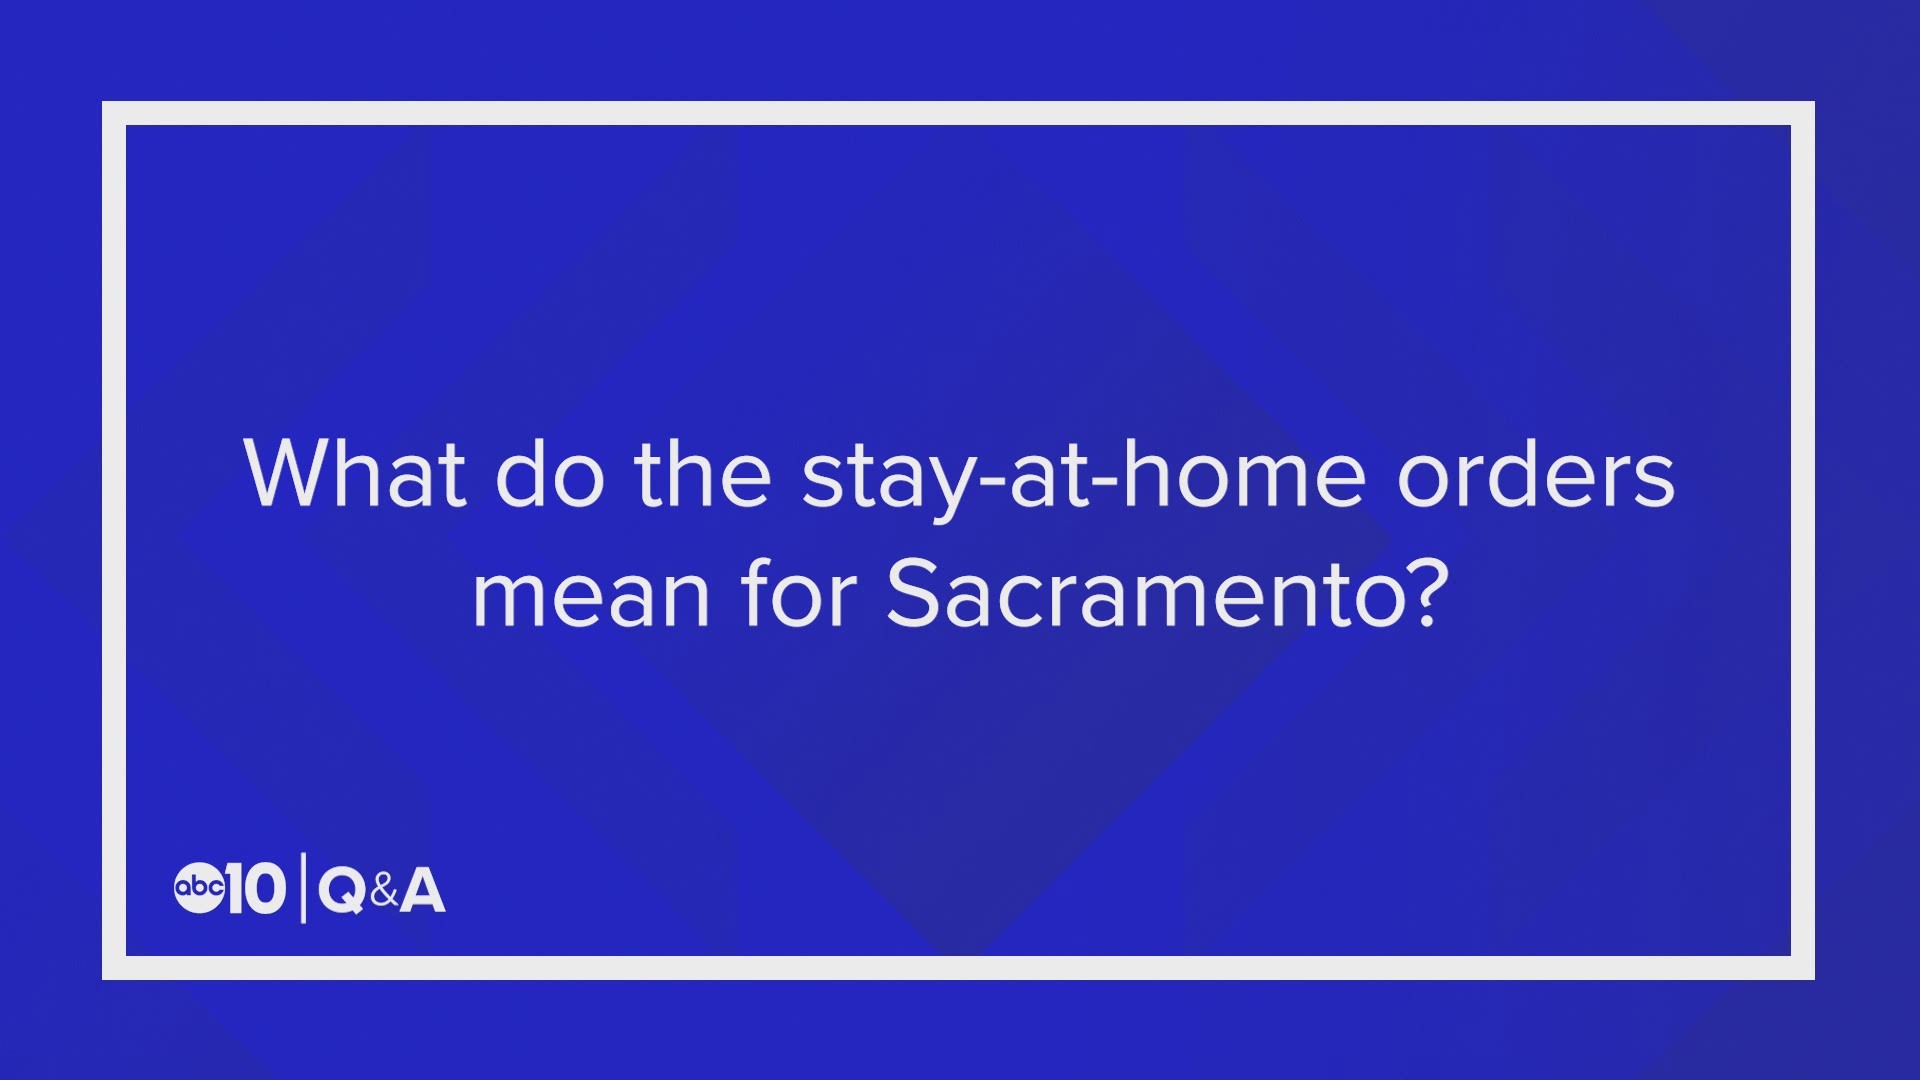 Greater Sacramento Region under stay-at-home order | abc10.com